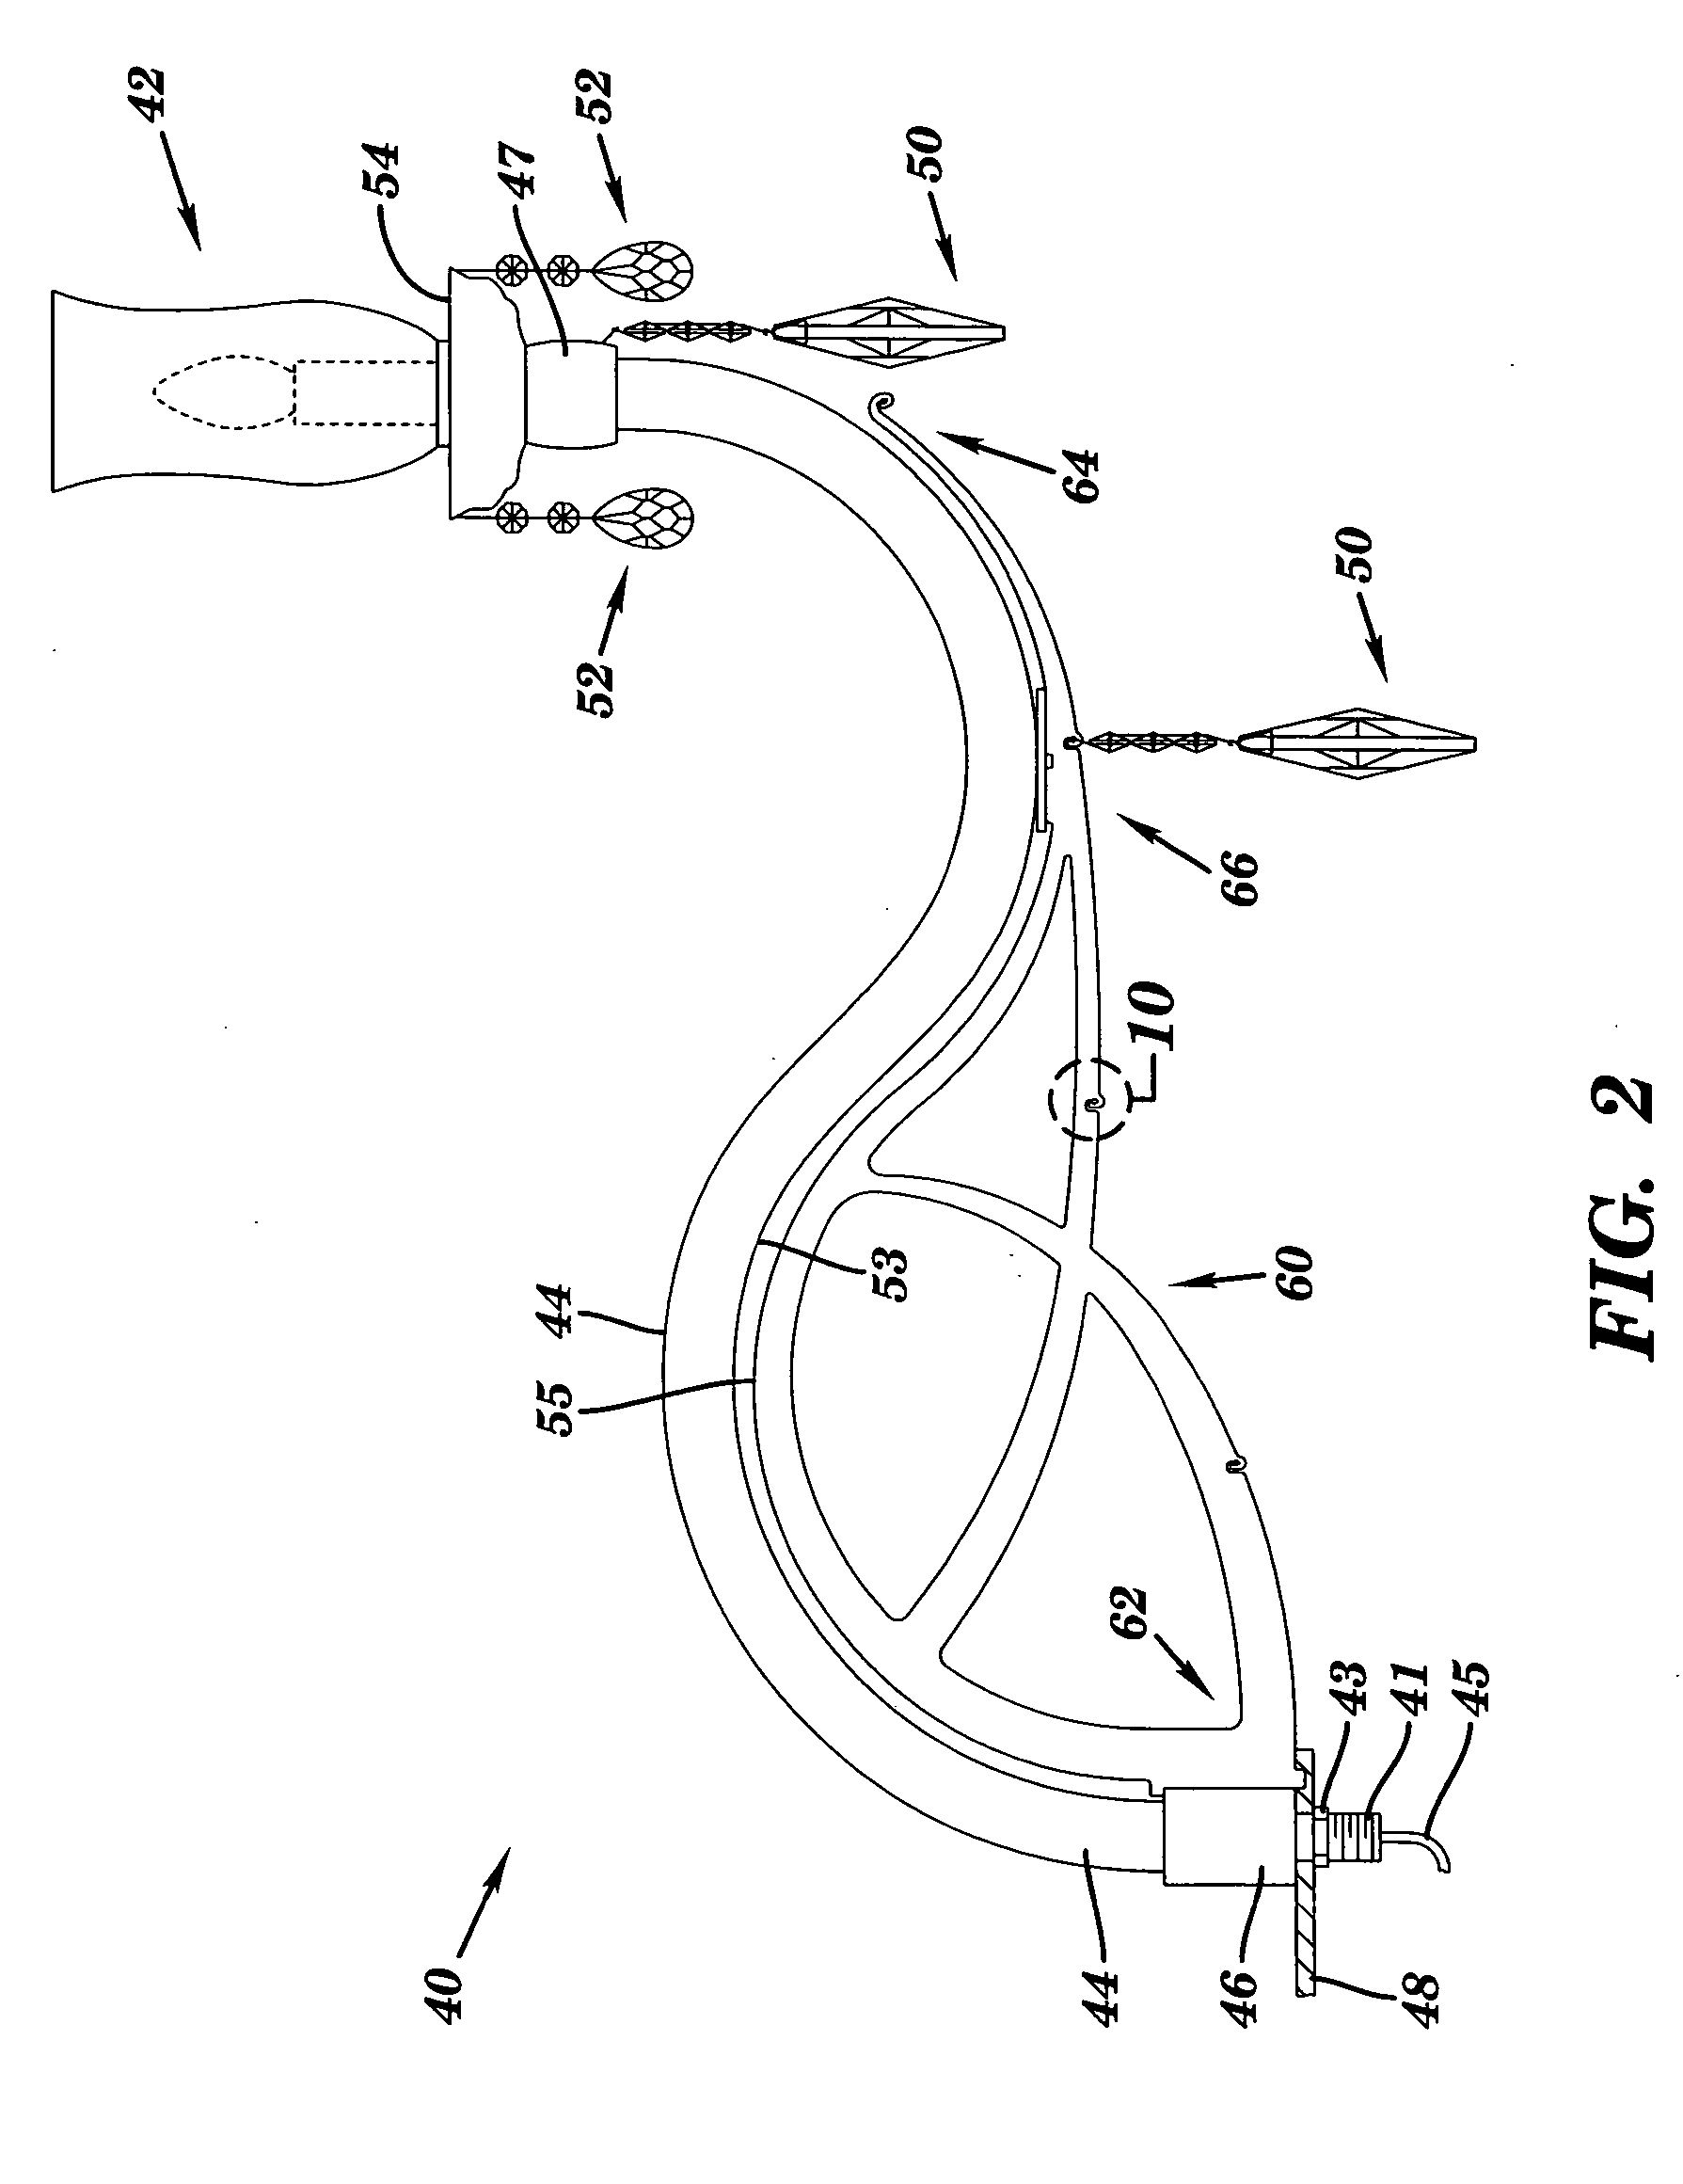 Arrangements, braces, and methods for supporting an arm of an ornamental fixture